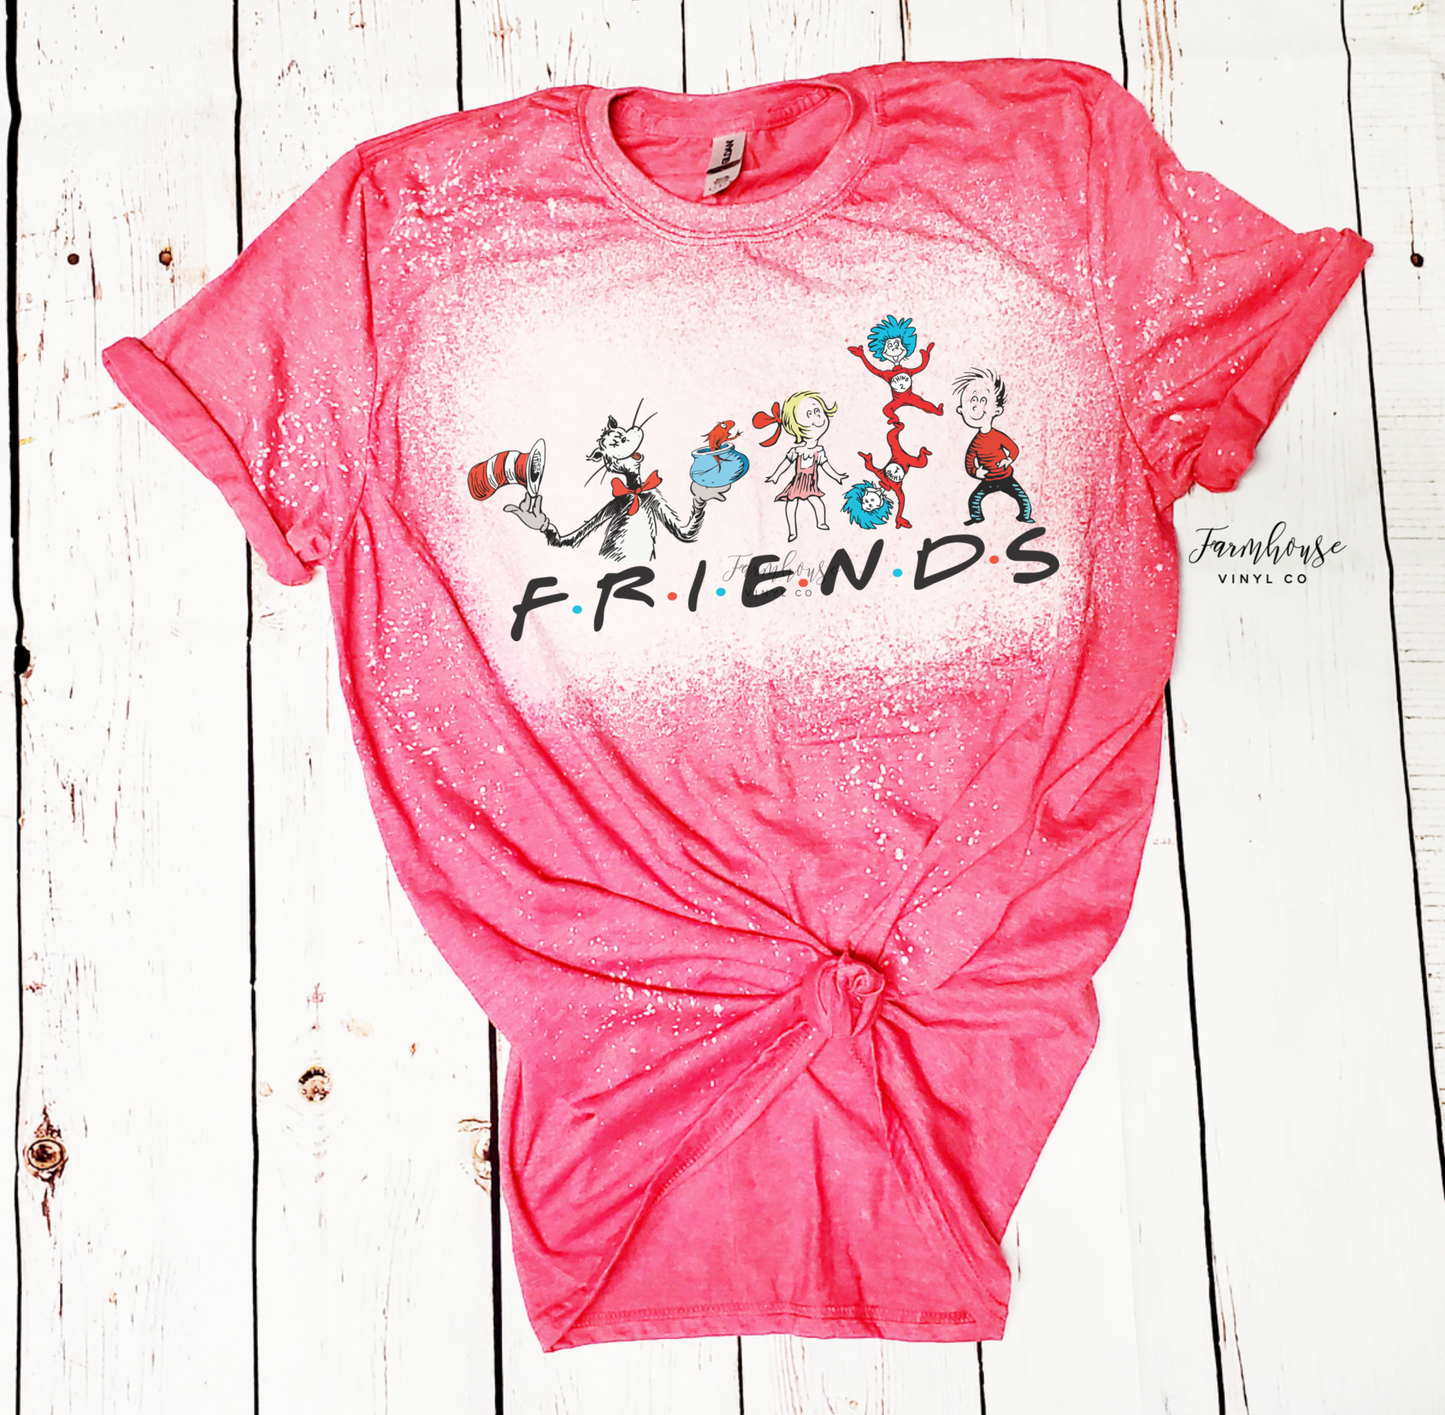 Oh The Places You'll Go Read Across America Shirts - Farmhouse Vinyl Co